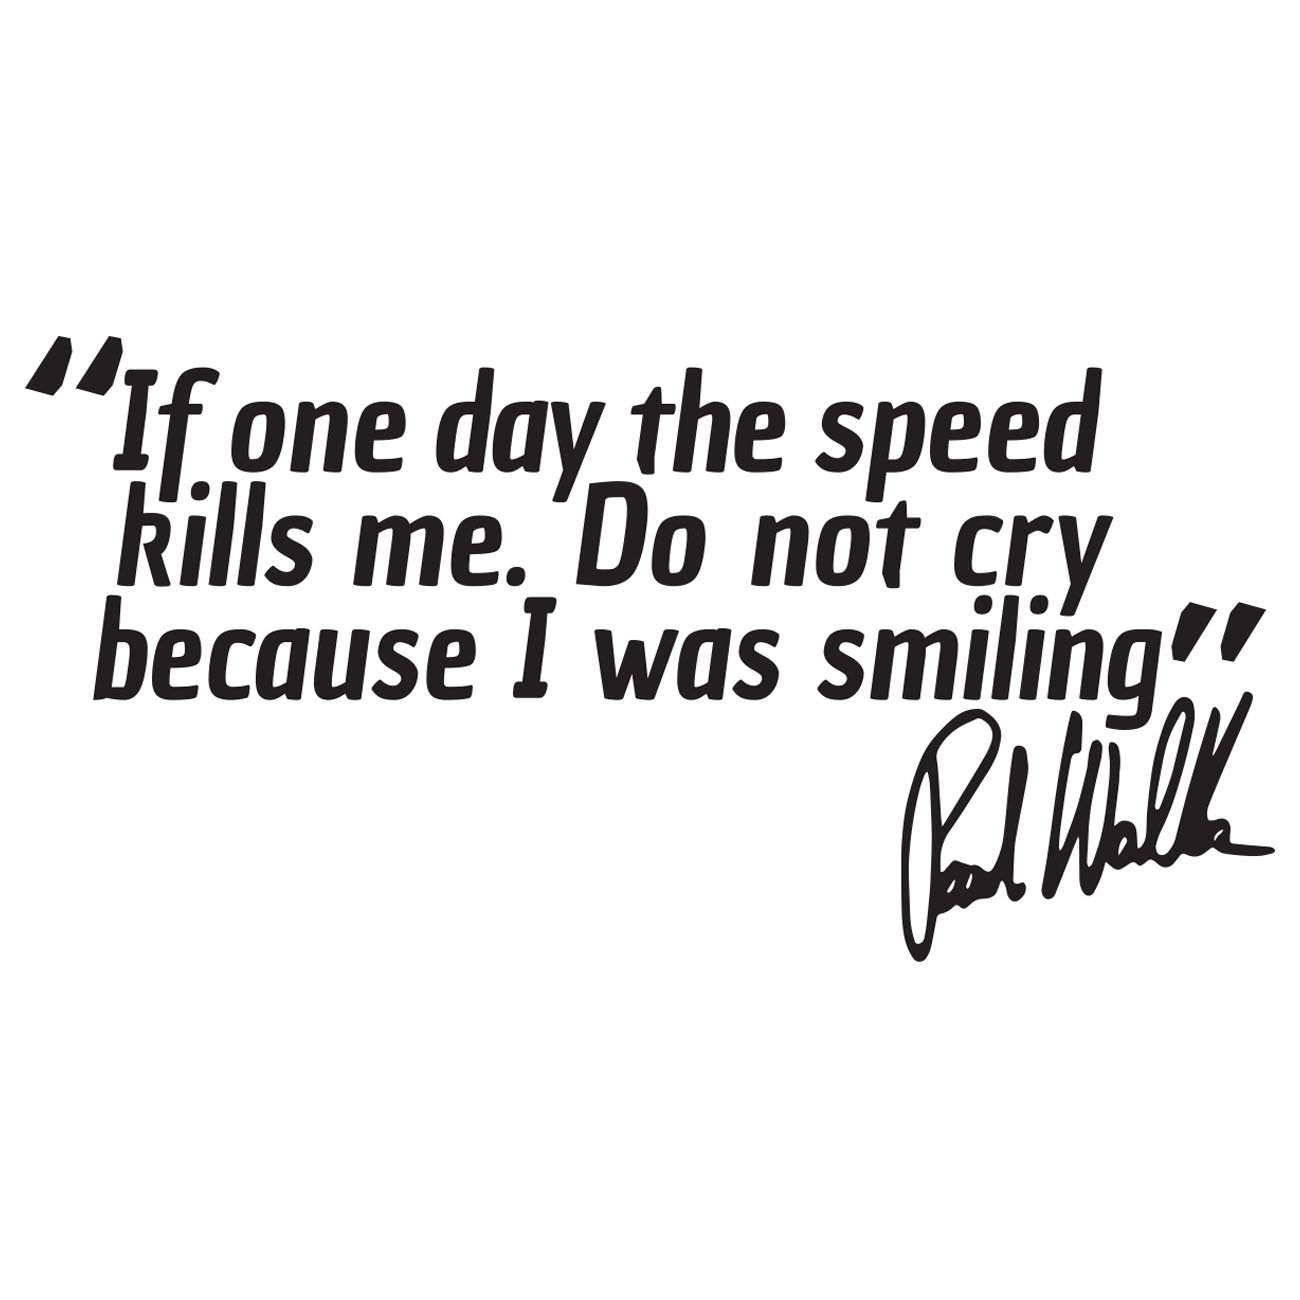 If one day the speed kills me - Paul Walker